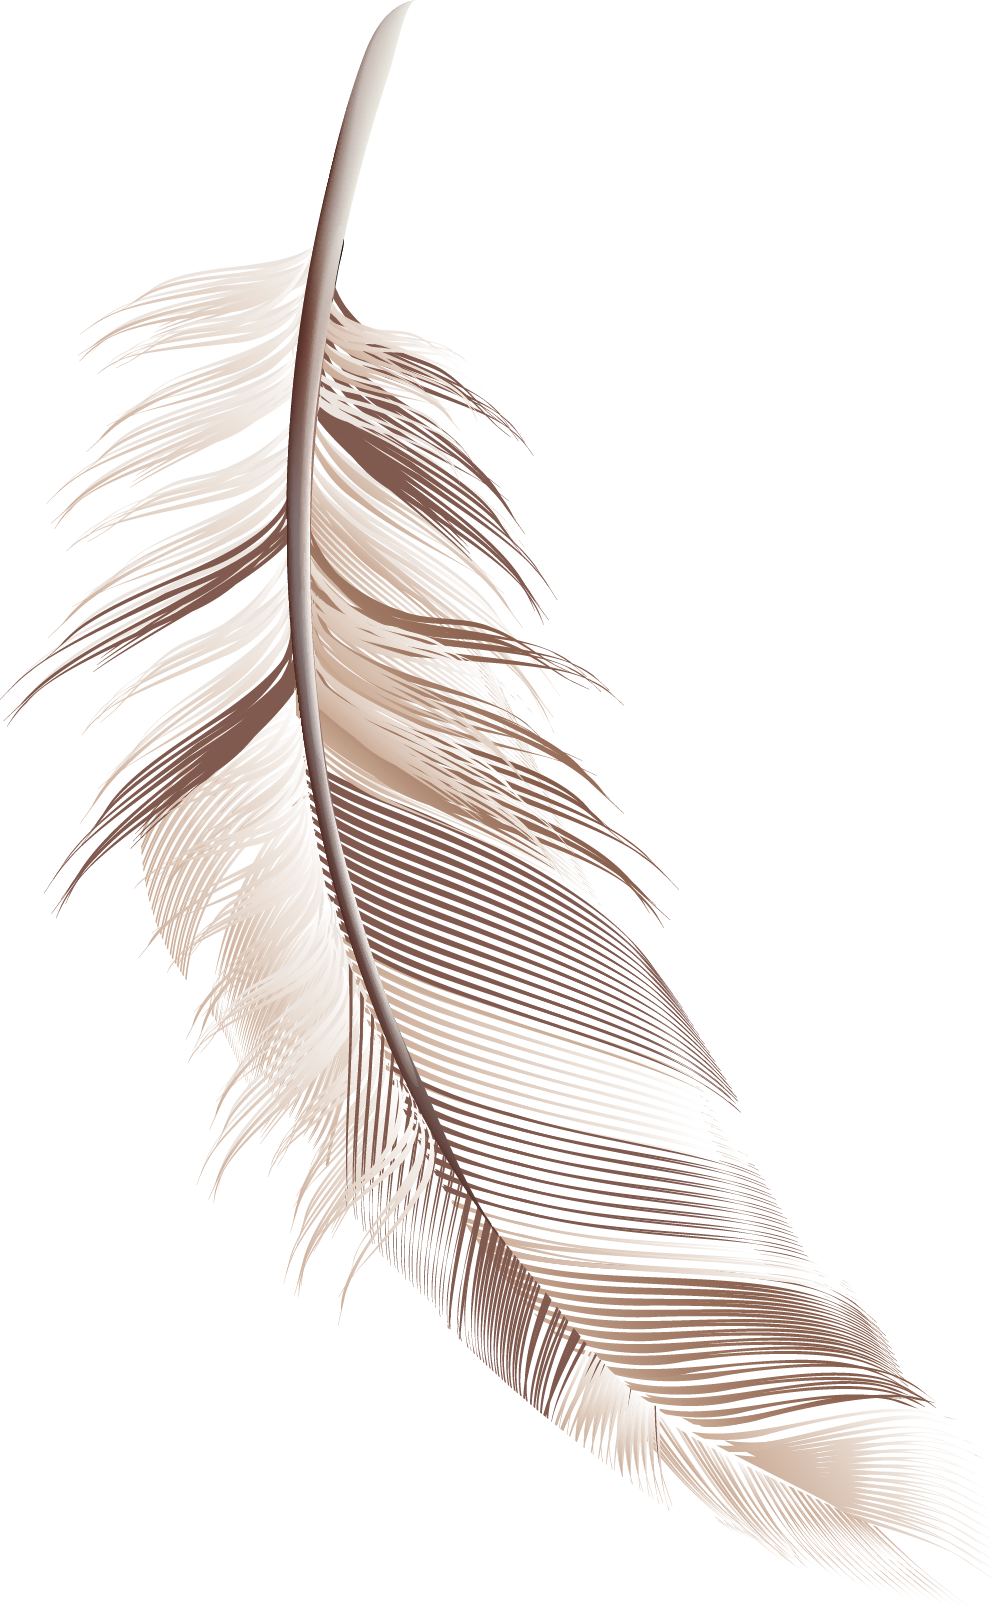 Boho Feathers Set Photoshop Brushes Vector Files And Transparent Png Images